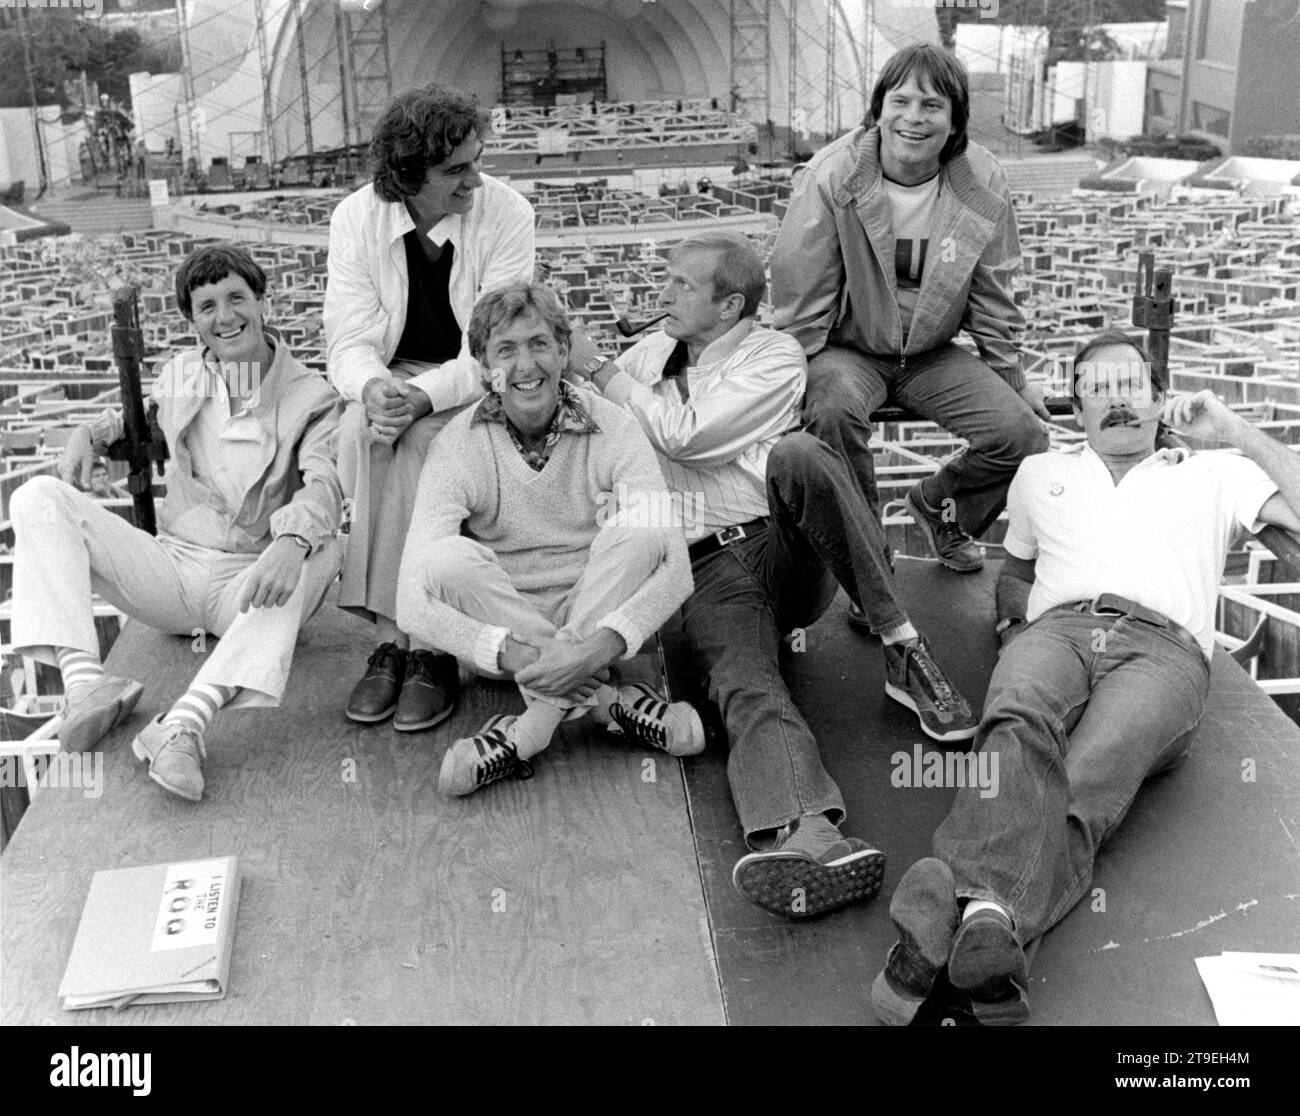 MICHAEL PALIN TERRY JONES ERIC IDLE GRAHAM CHAPMAN TERRY GILLIAM and JOHN CLEESE candid portrait in September 1980 during rehearsals / filming for MONTY PYTHON LIVE AT THE HOLLYWOOD BOWL 1982 director TERRY HUGHES and IAN MacNAUGHTON producer Terry Hughes executive producer George Harrison A Monty Python Begging Bowl Partnership film for HandMade Films Stock Photo